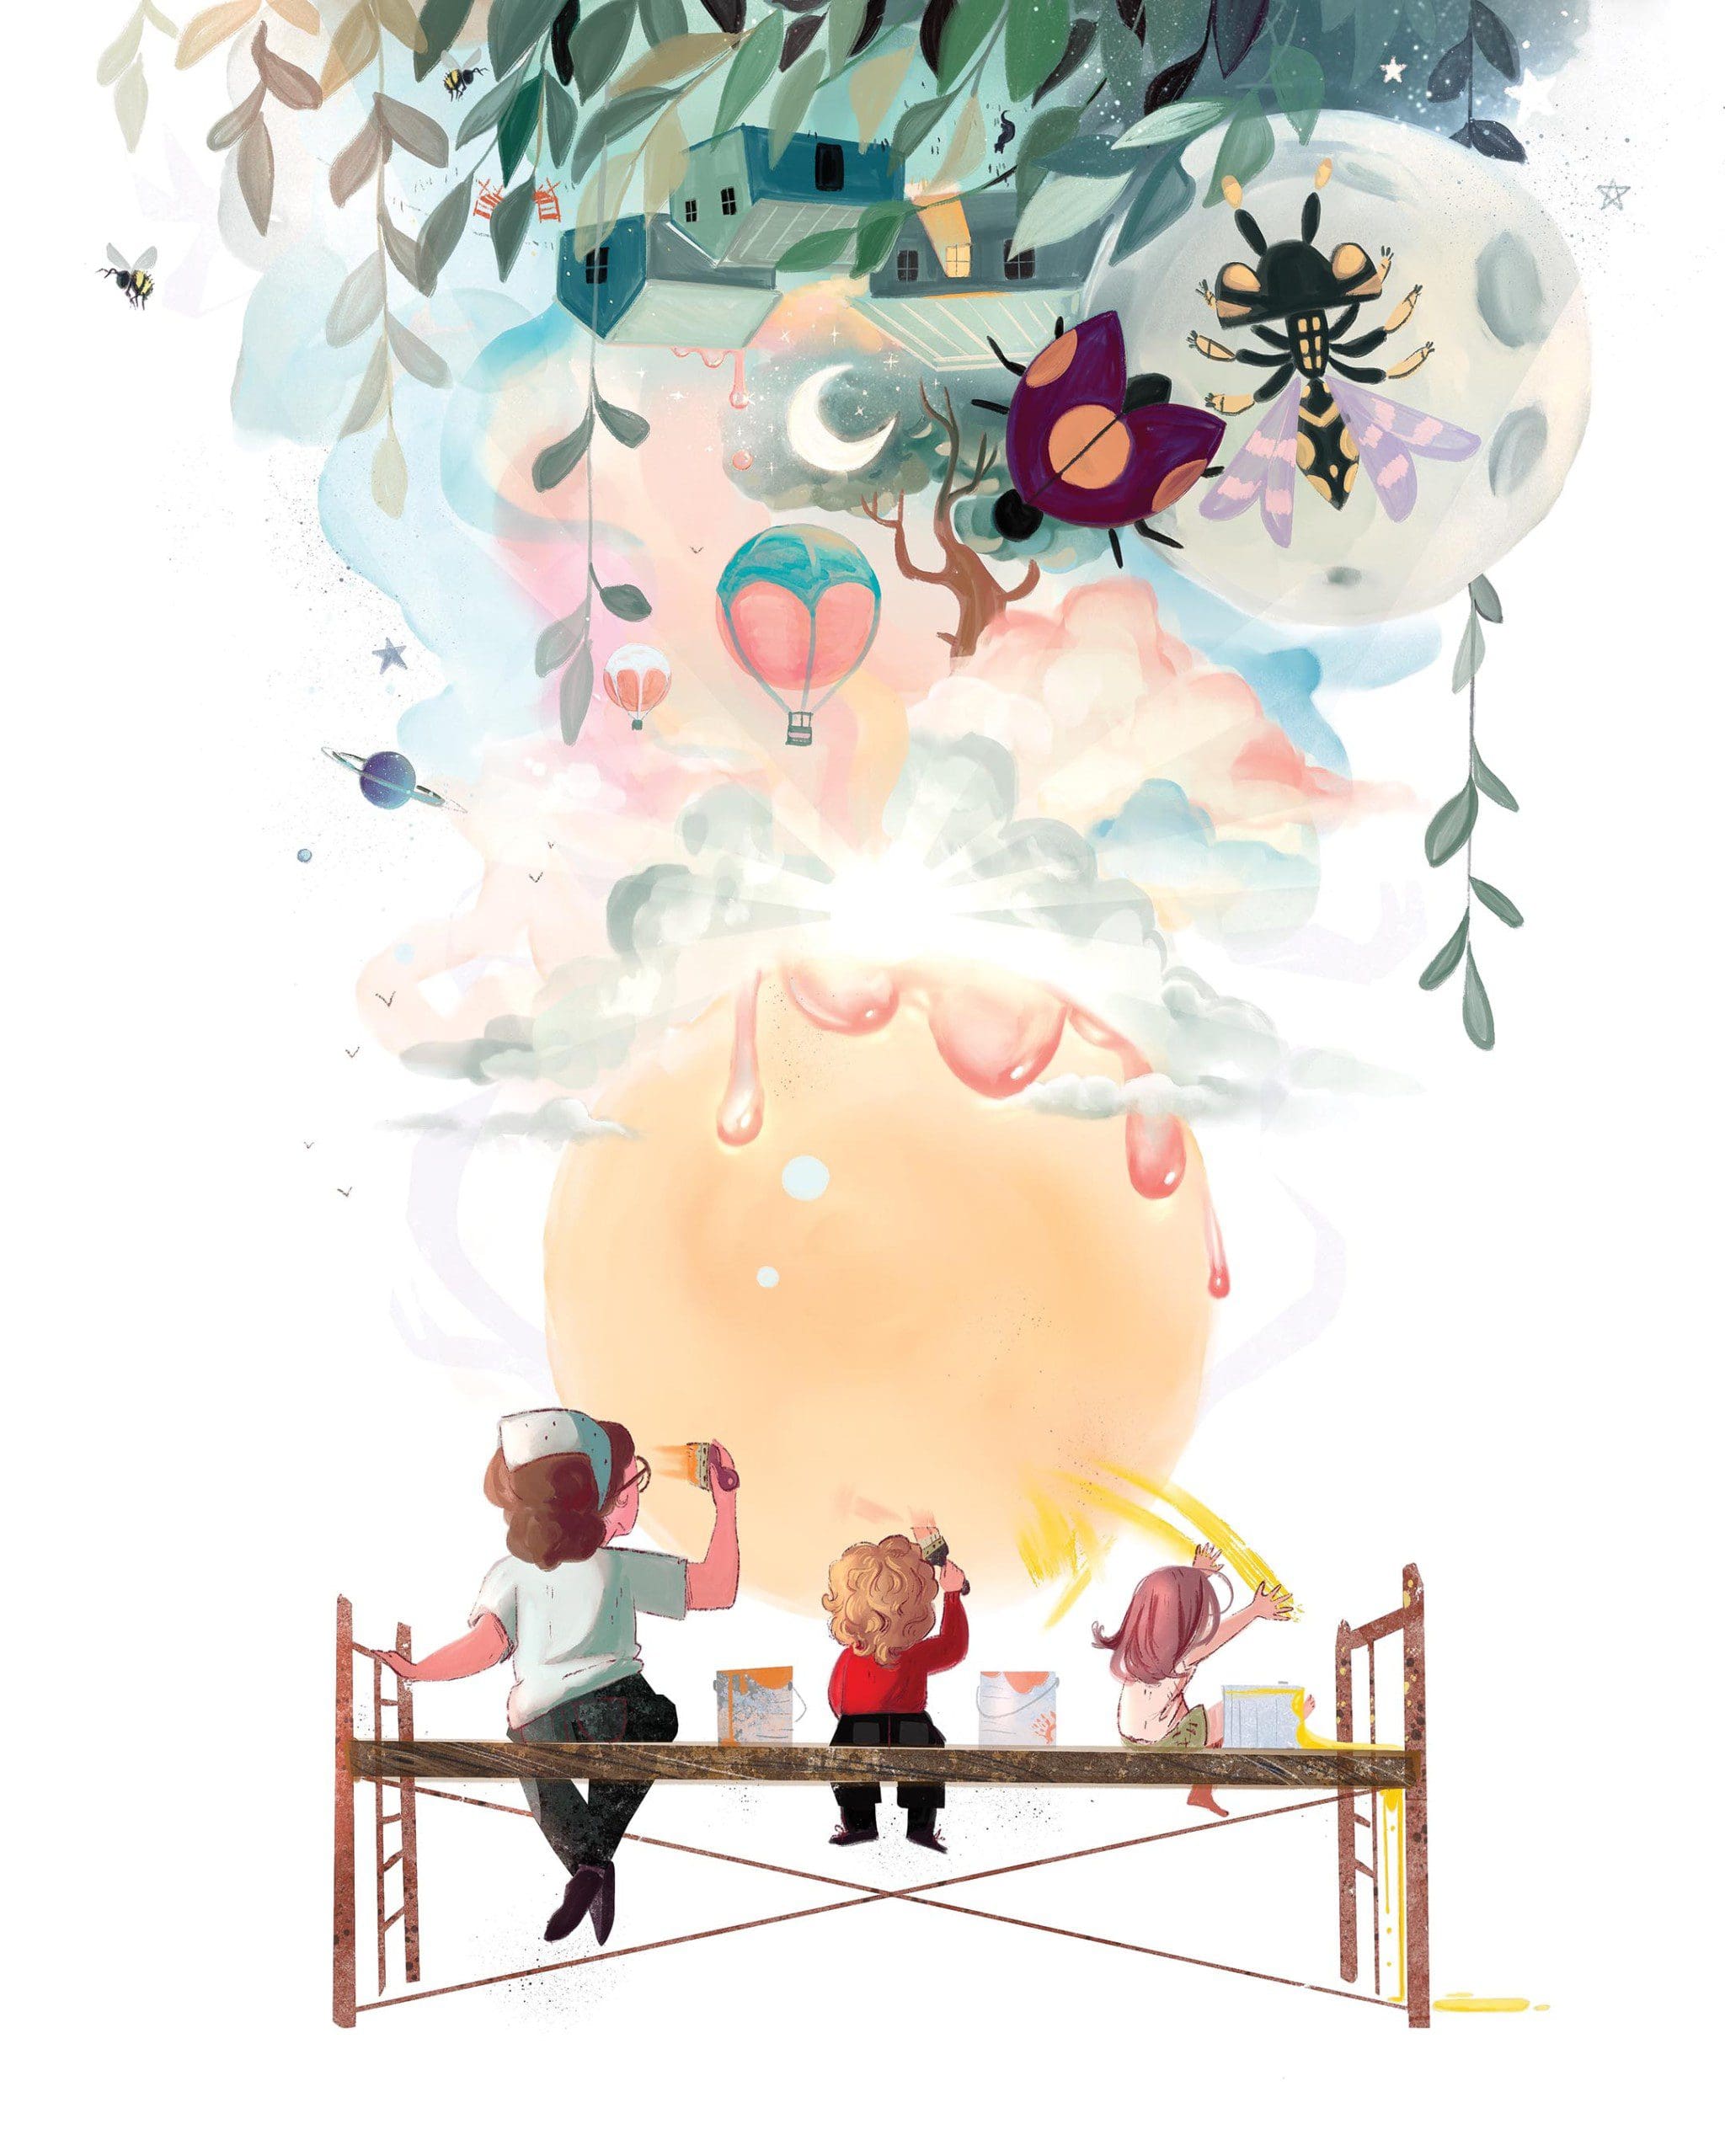 An illustration of a teacher and two students sitting on scaffolding with their backs towards us, painting a beautiful. scape with upside down houses, a crescent moon, hot air balloons, some bugs and some planets. Illustrated by Sara Willia